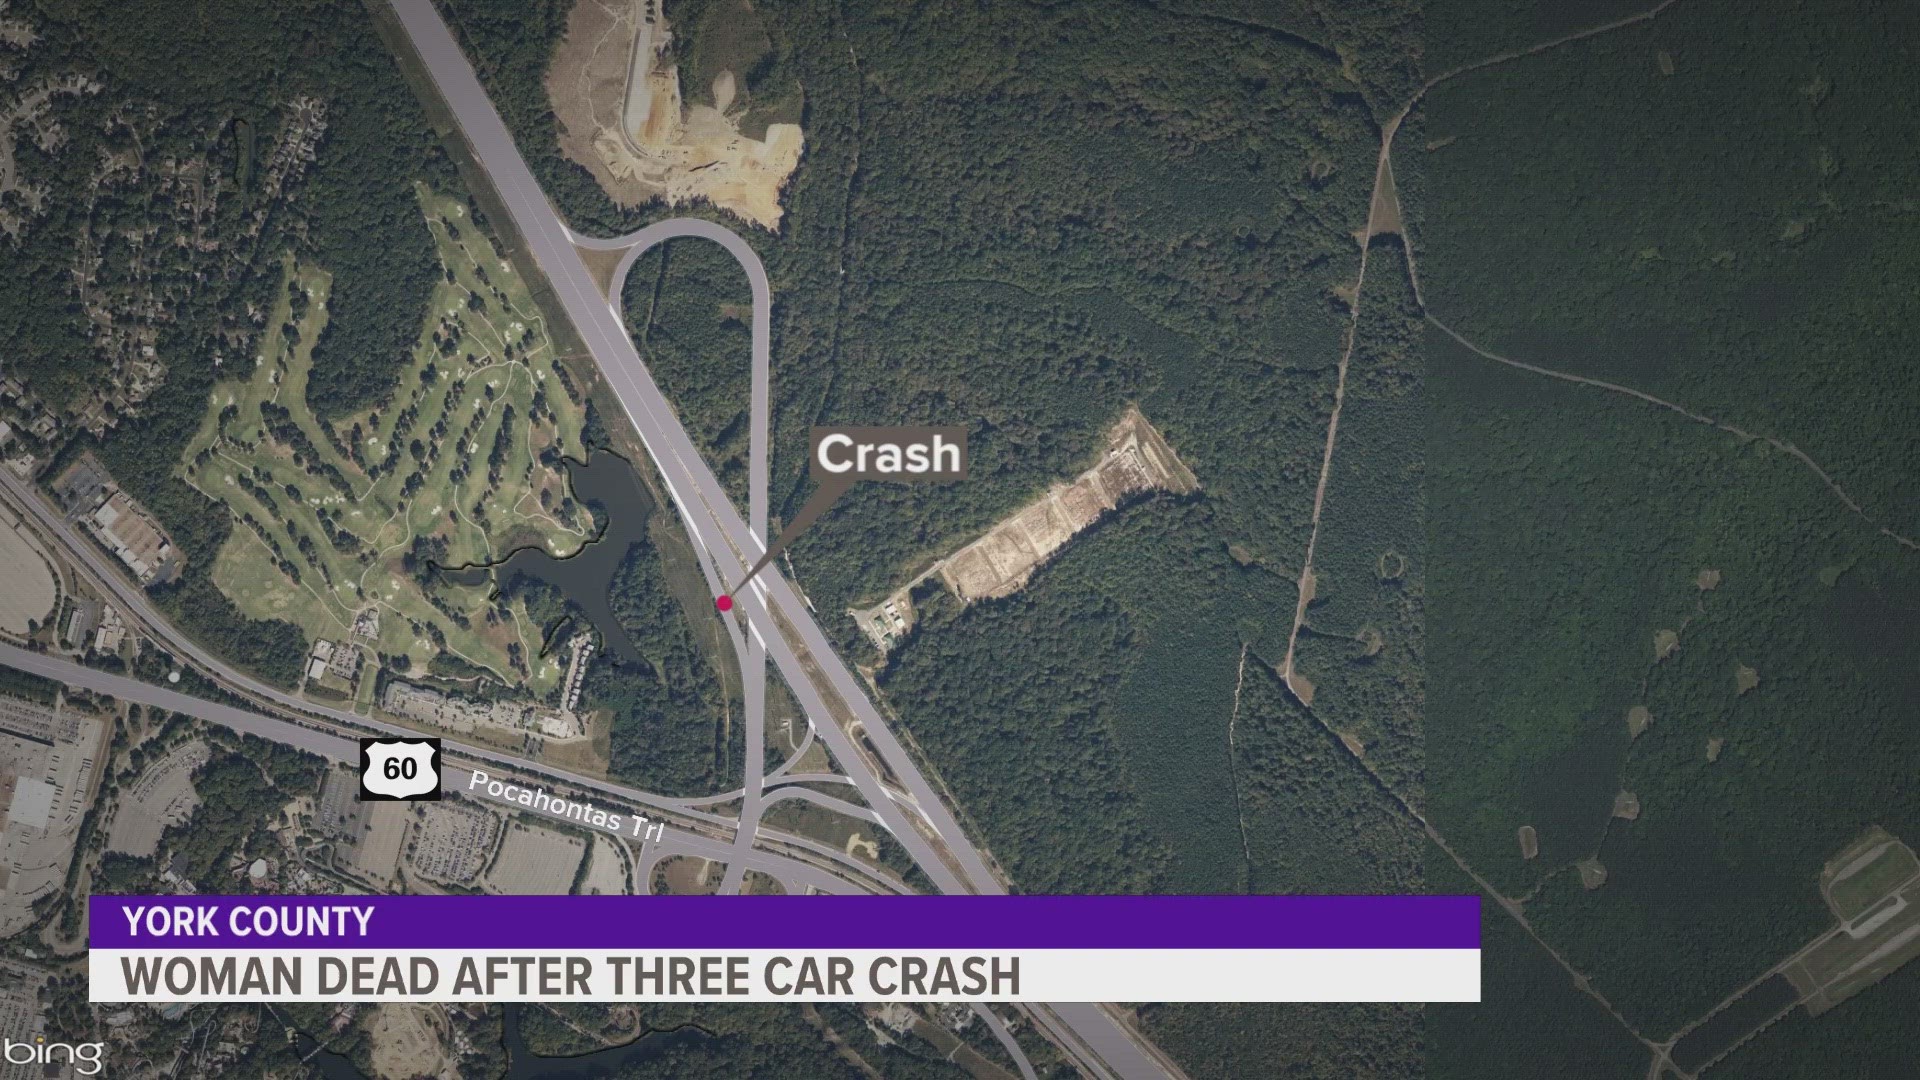 Police say Friday around 8:00 p.m. on I-64 near the Busch Gardens exit, Carol Mitchell sideswiped a vehicle while attempting a lane change and was hit from behind.